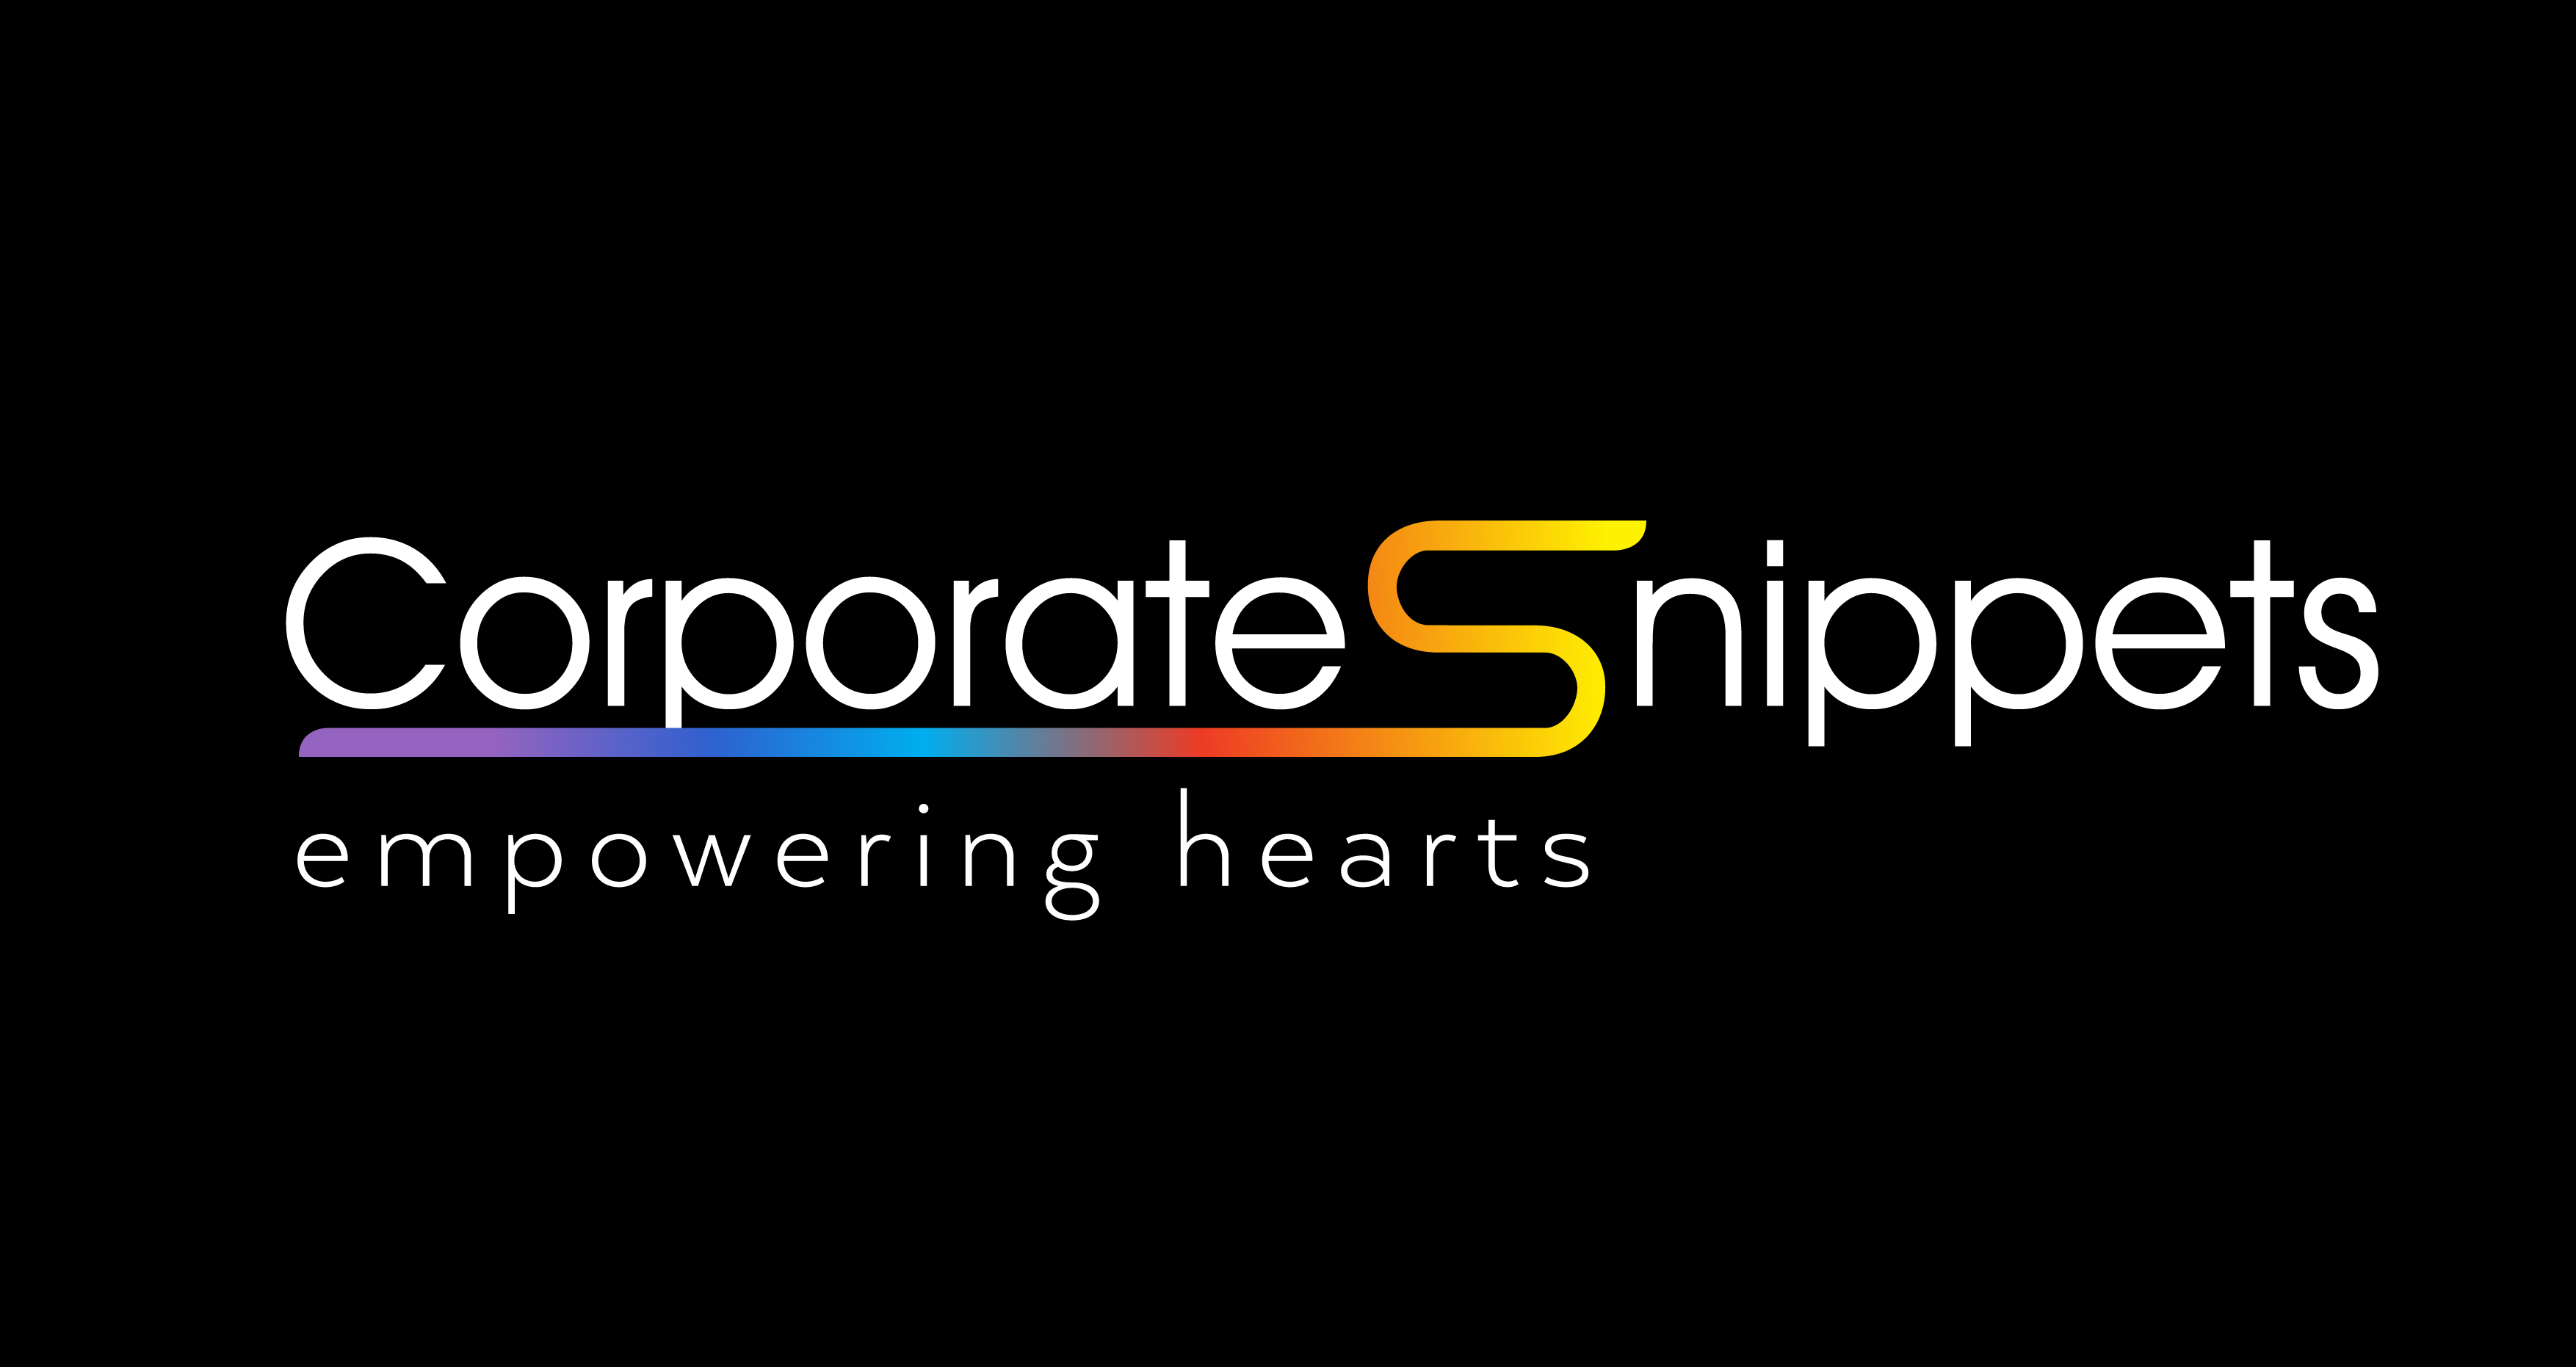 Corporate Snippets...Dear Leader: Show Leaders why and how to nurture the hearts they lead.